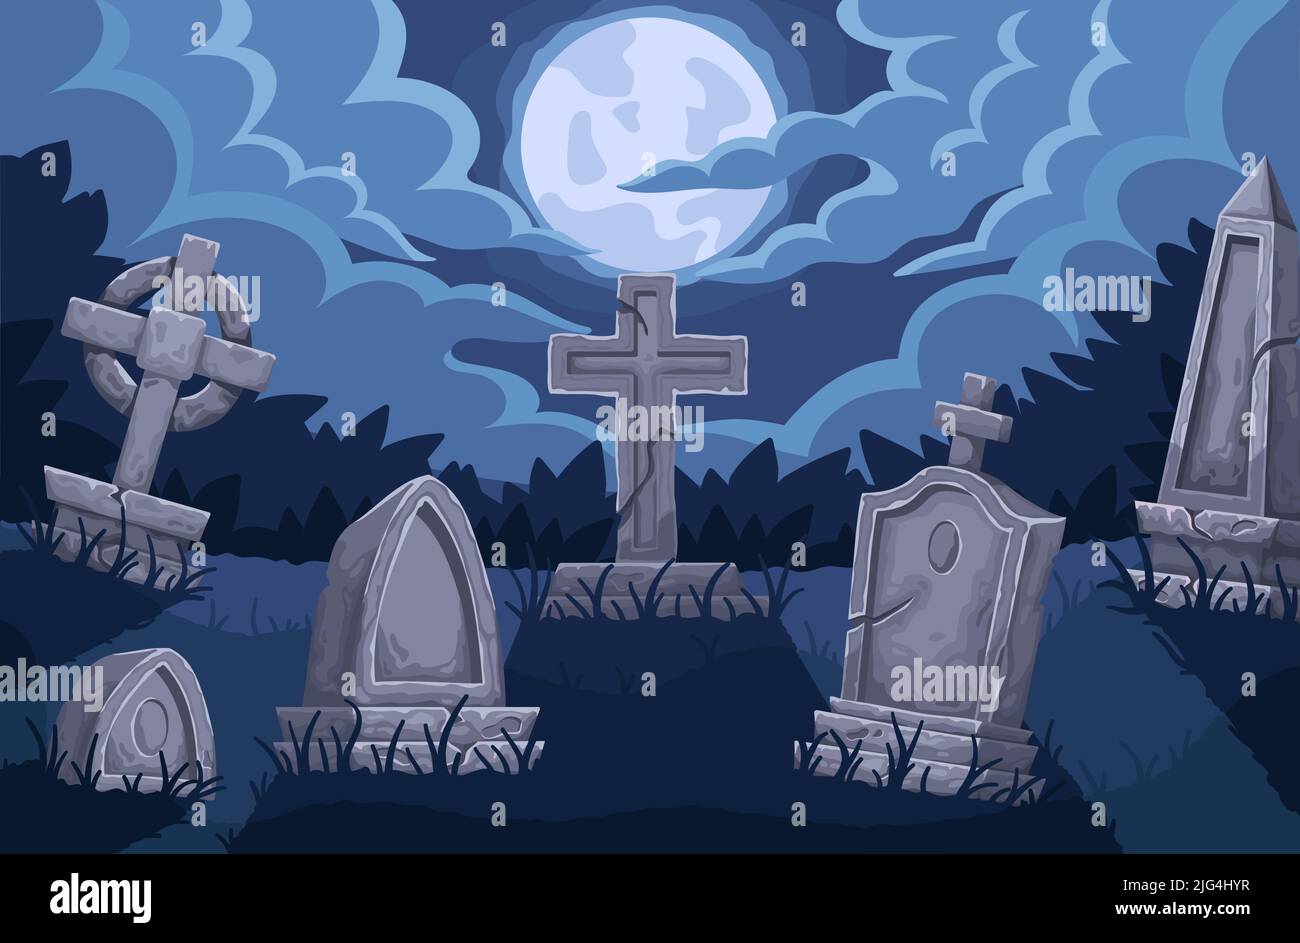 Full Moon Over Graveyard Spooky Halloween Night Among The Graves Cemetery Tombstones And